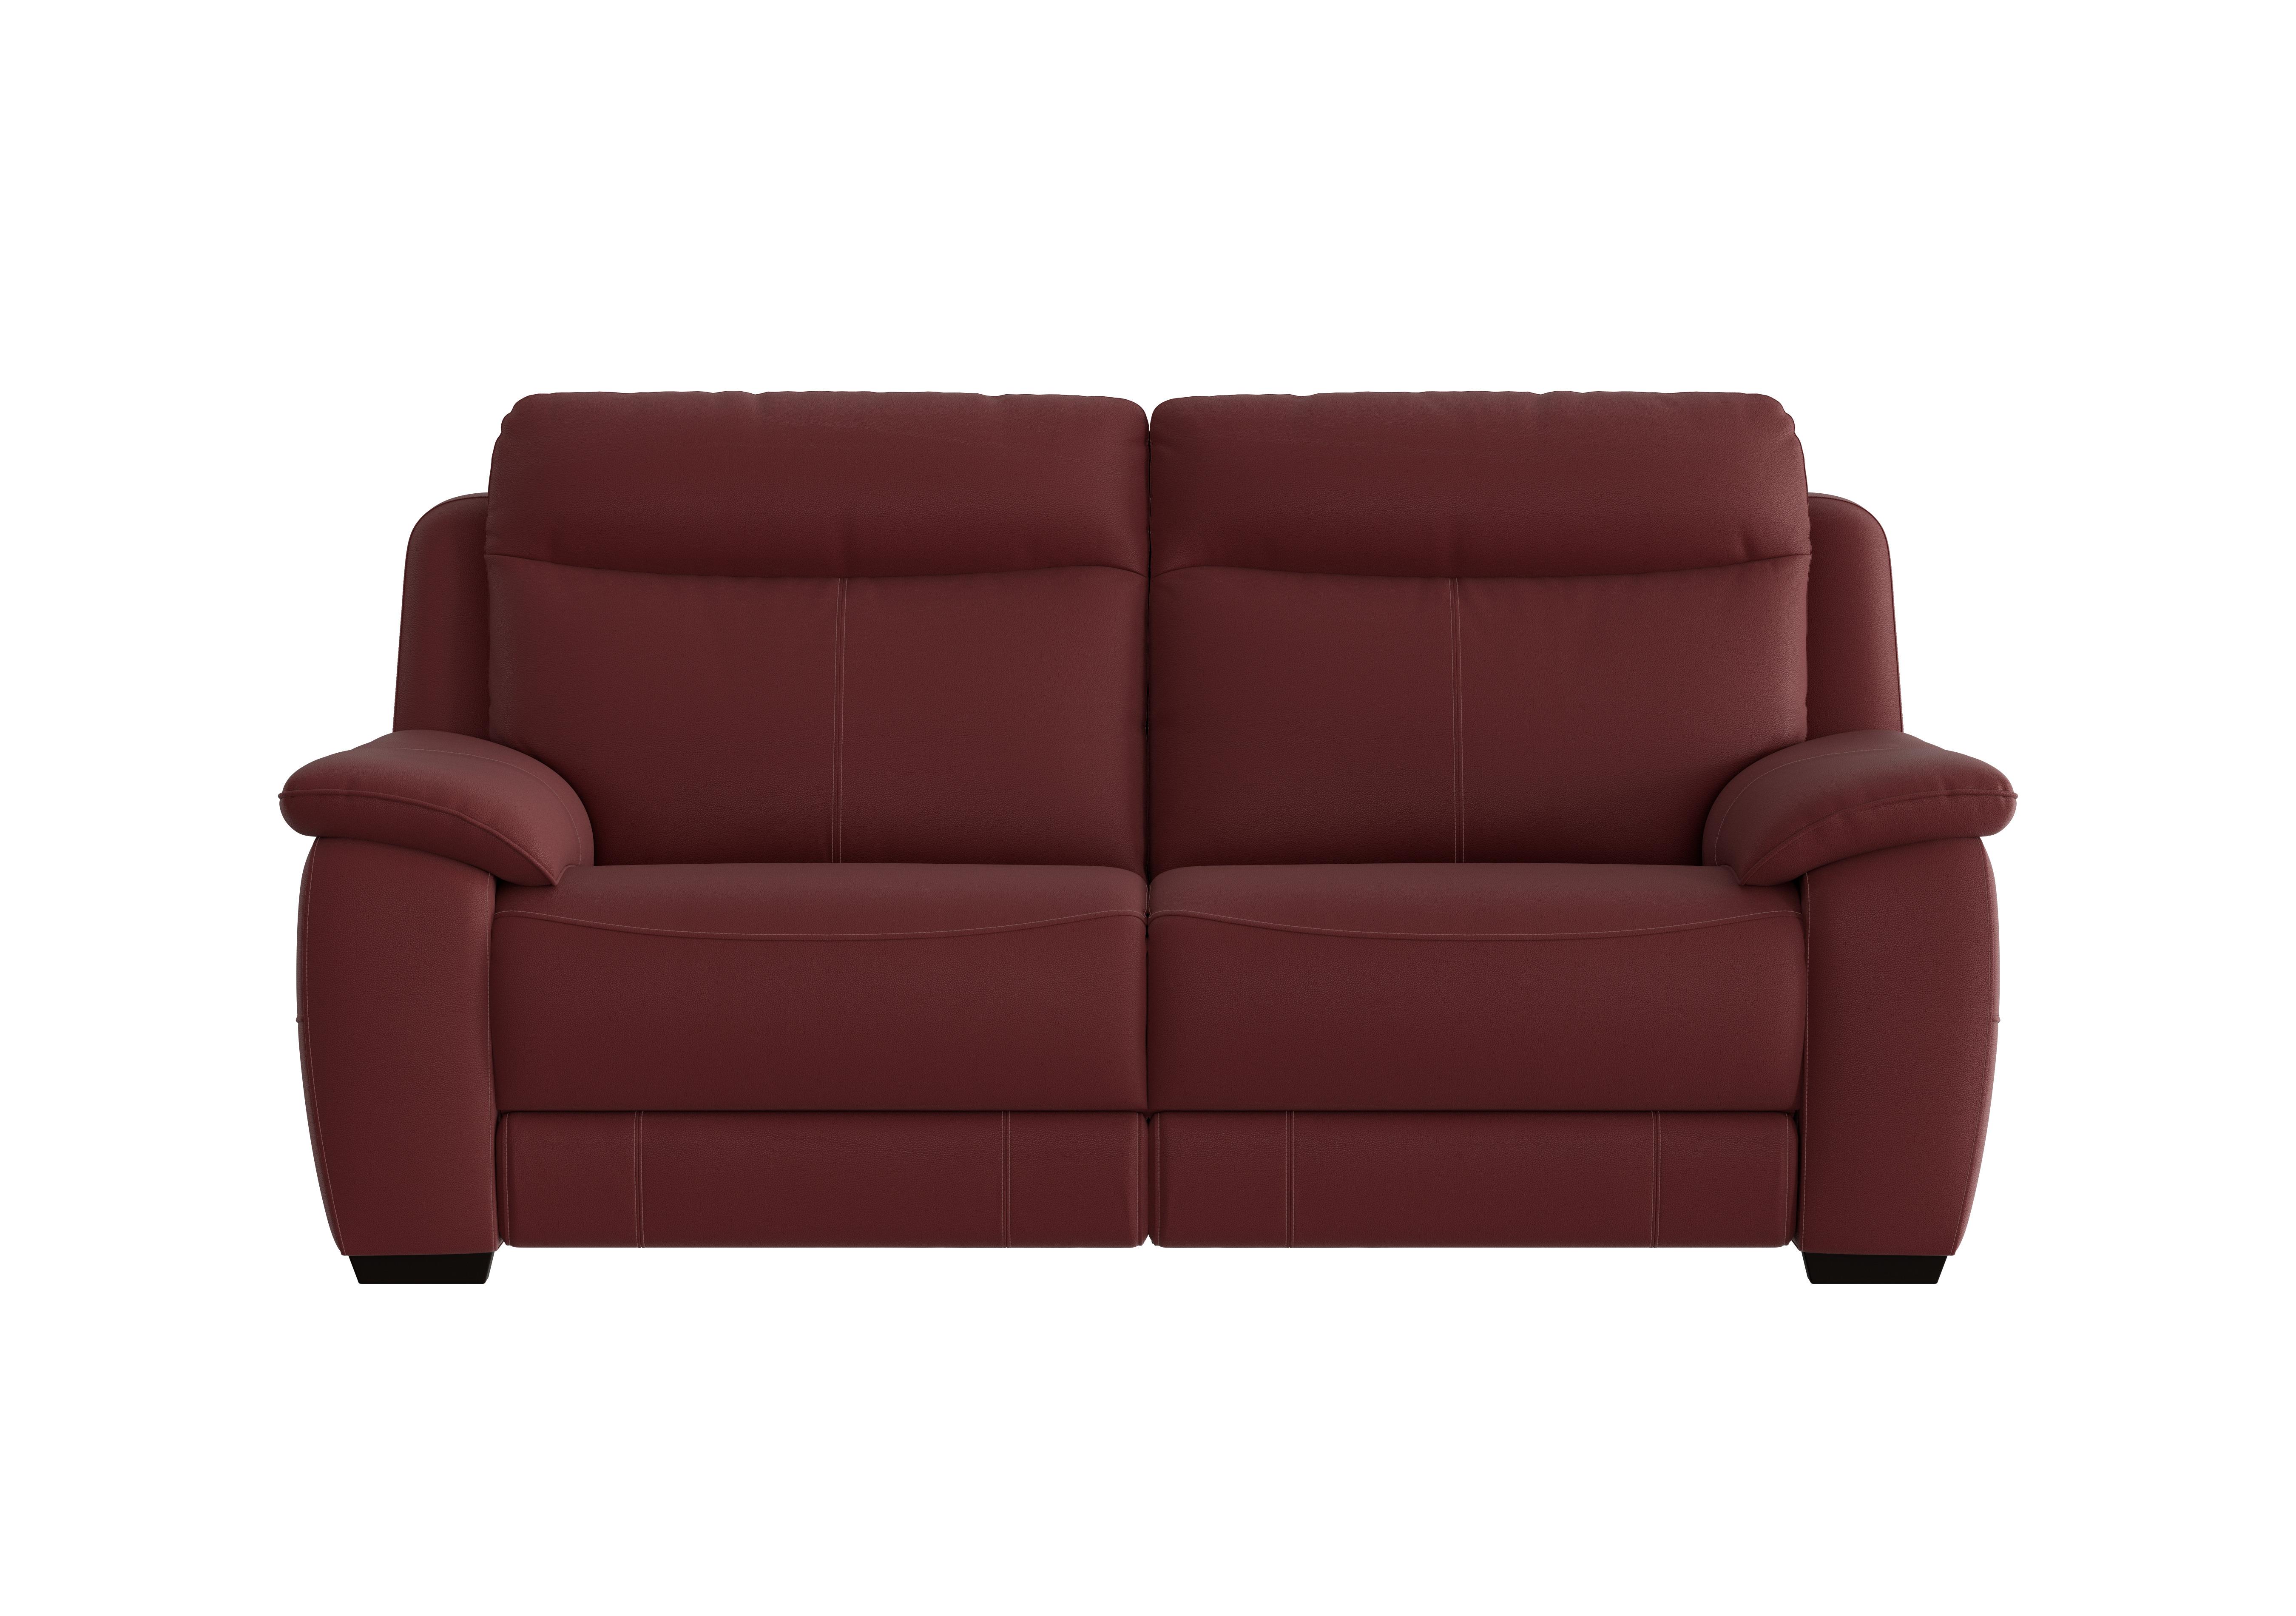 Starlight Express 3 Seater Leather Sofa in Bv-035c Deep Red on Furniture Village